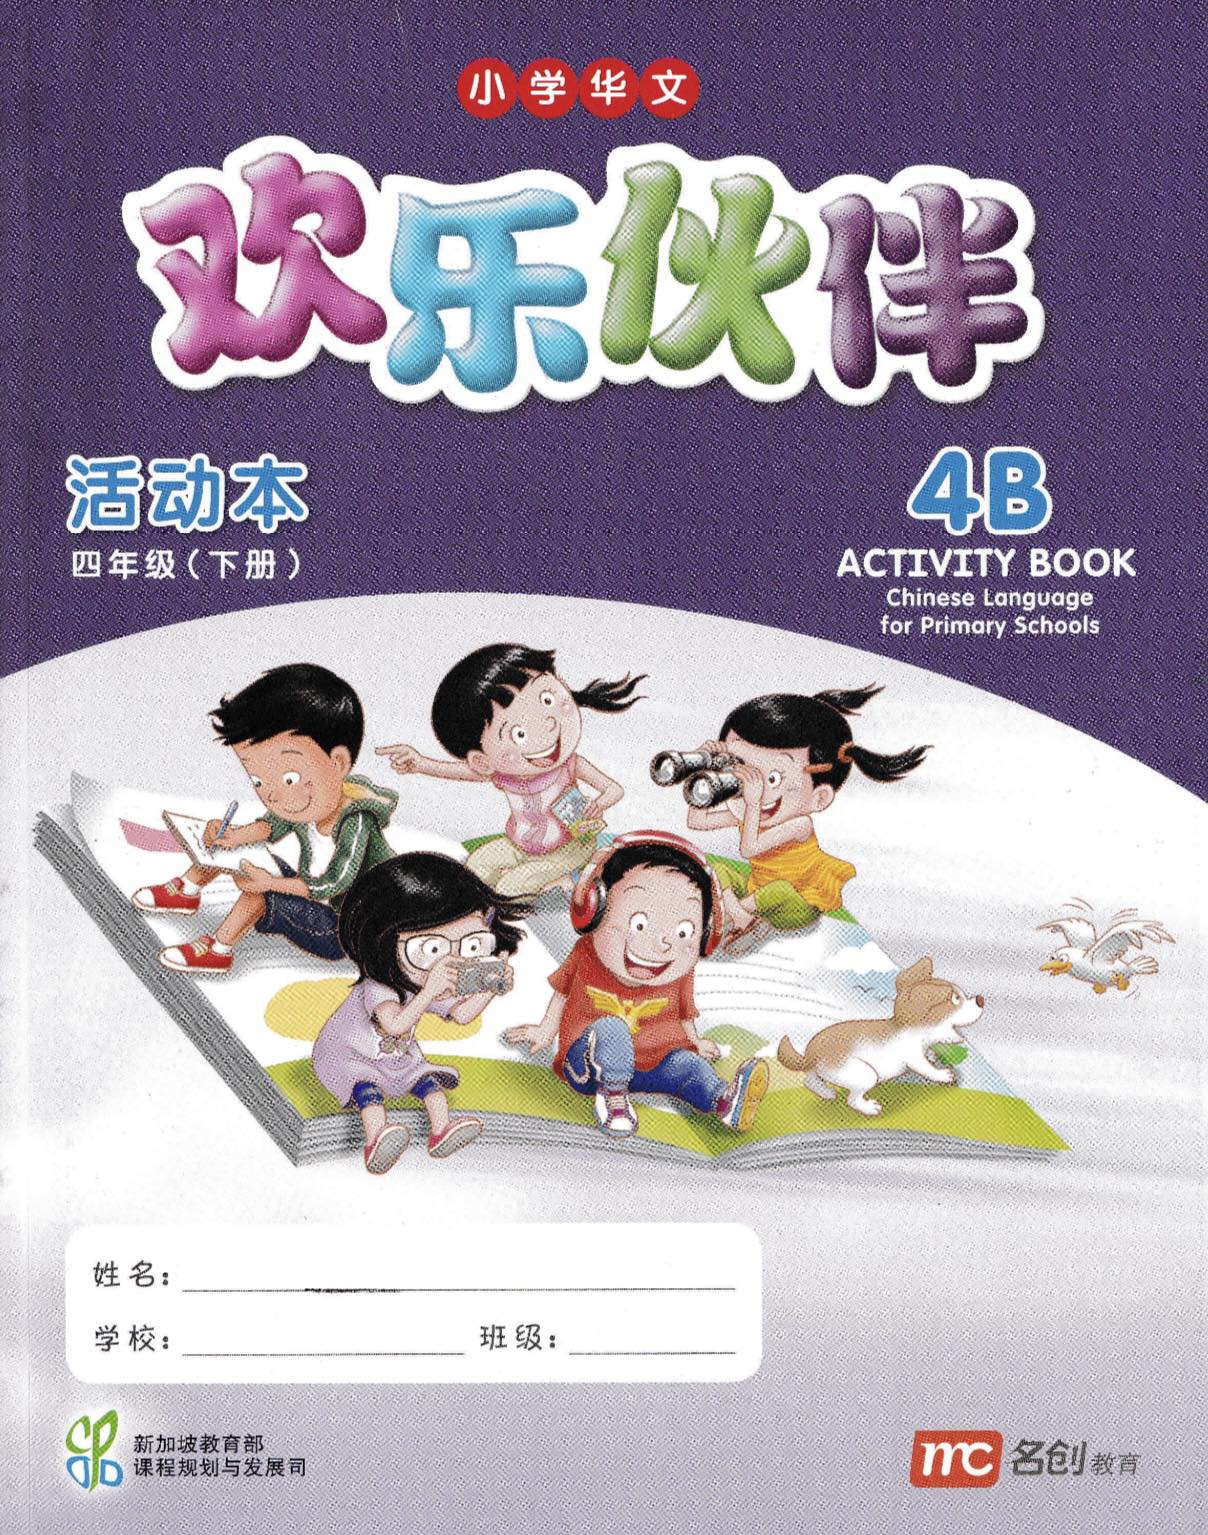 Chinese Language for Primary 4